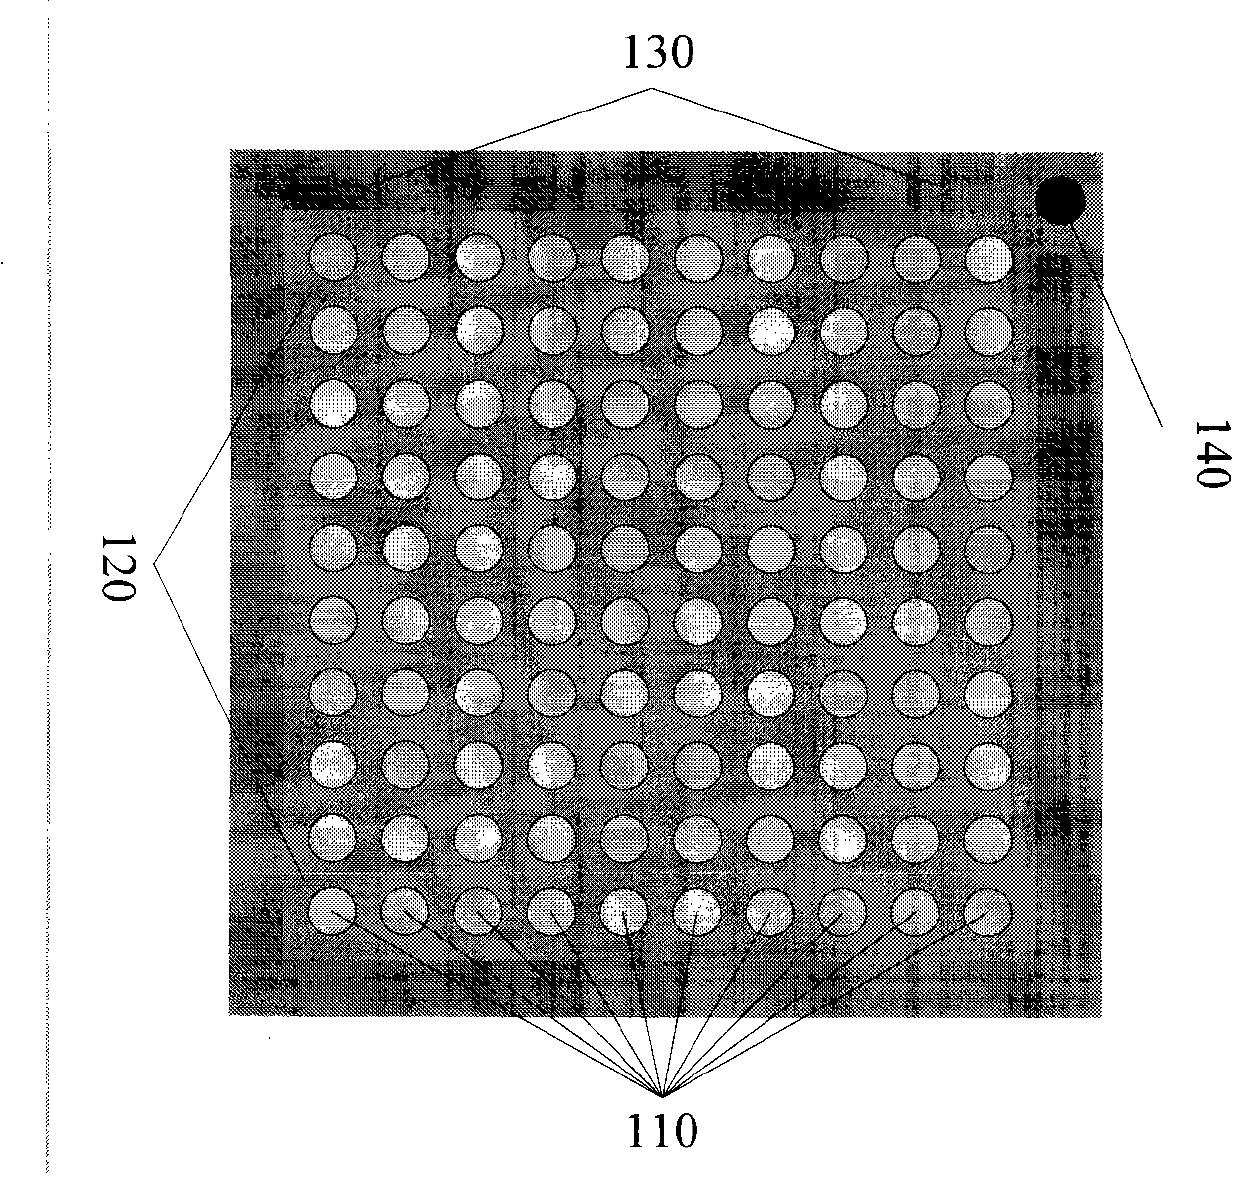 Microstructural plasma device based on printed circuit board process